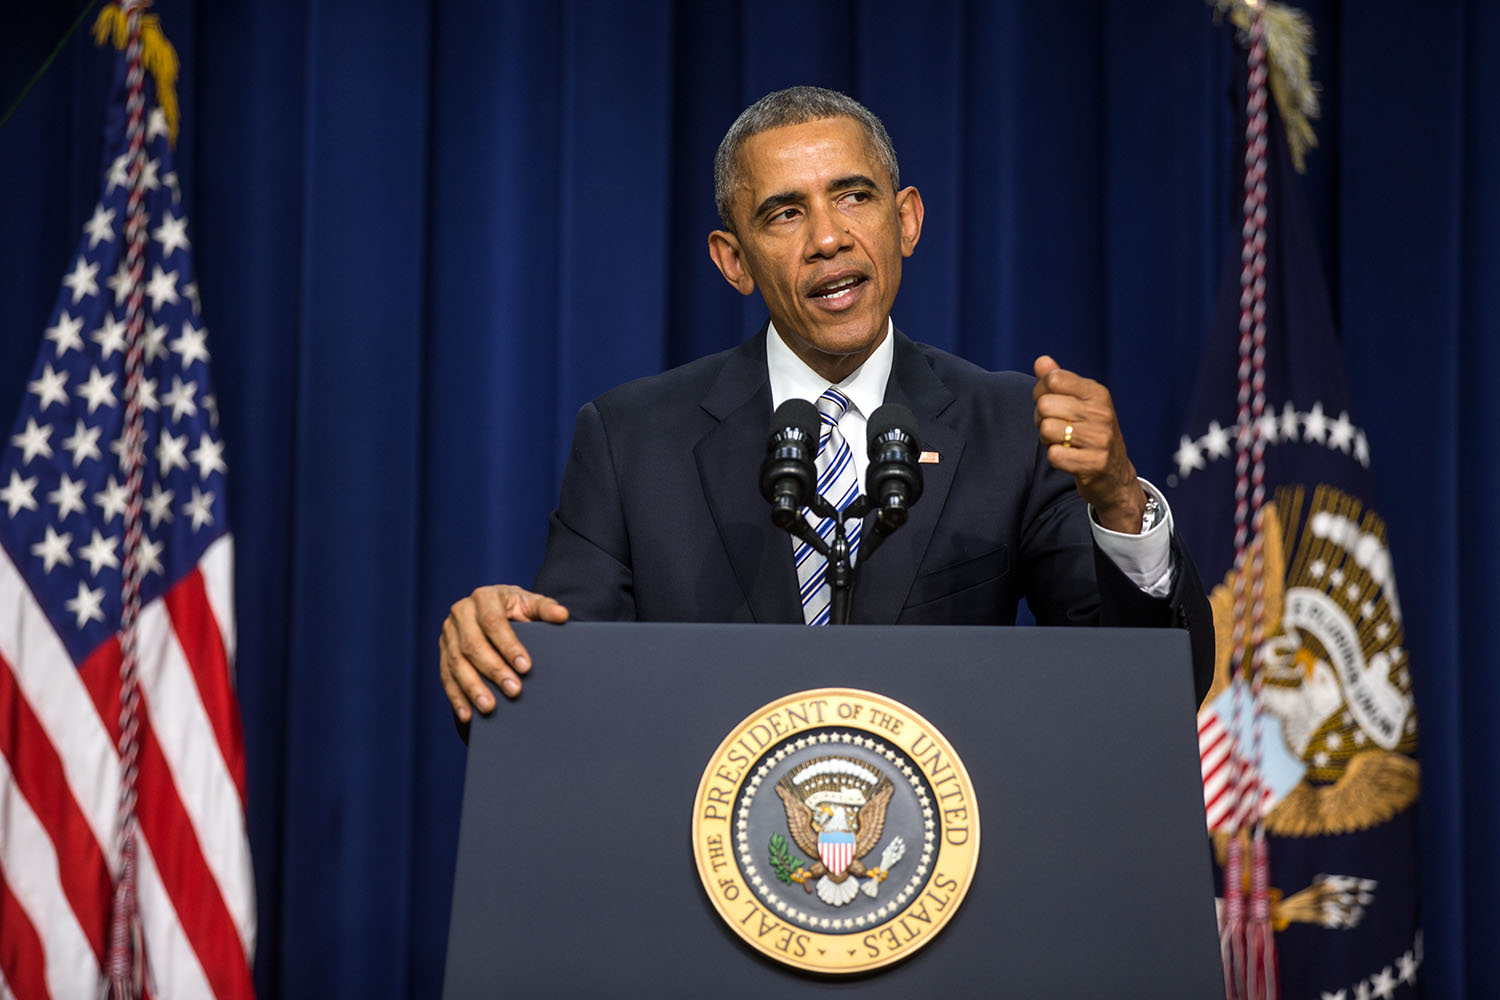 President Obama speaks at the White House Summit on Countering Violent Extremism (1)